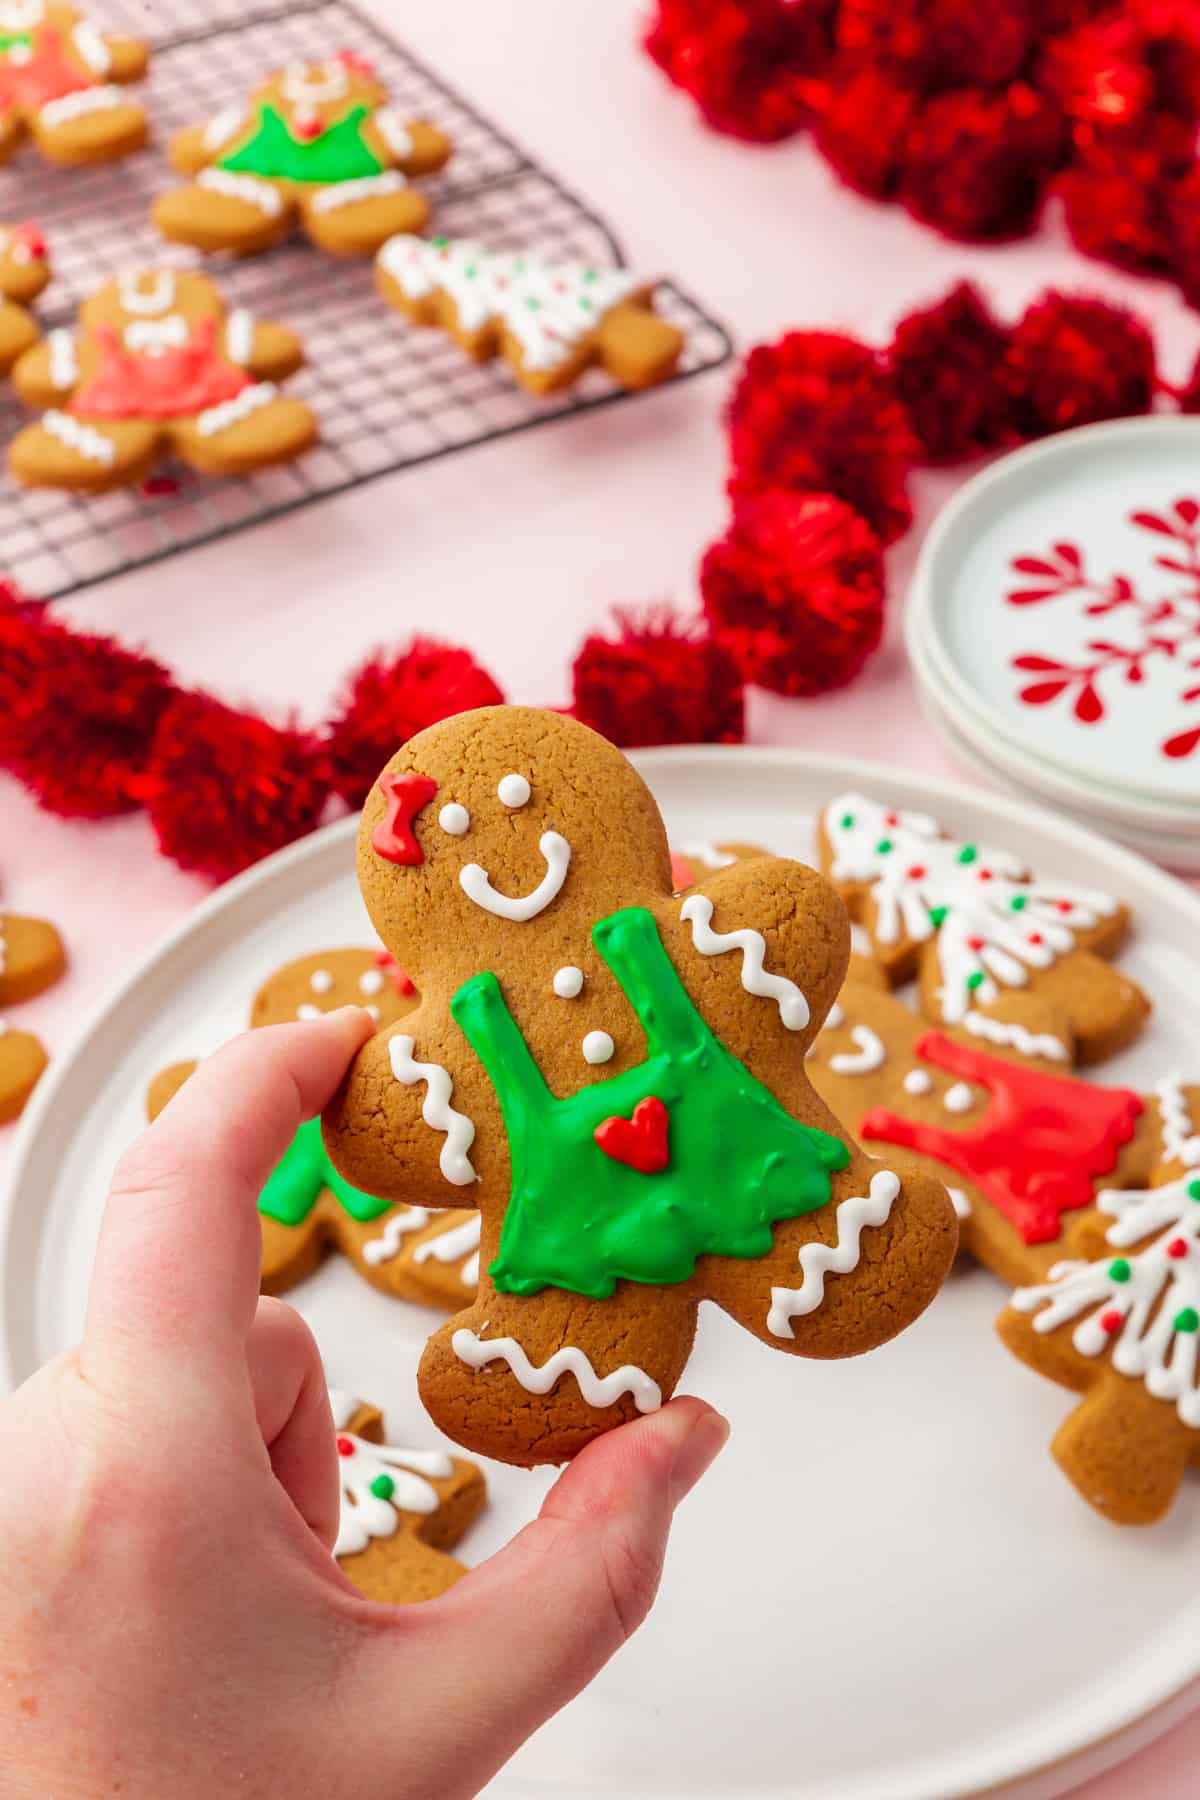 A hand holding a gingerbread person cookie decorated with a green royal icing dress and white and red decorations.